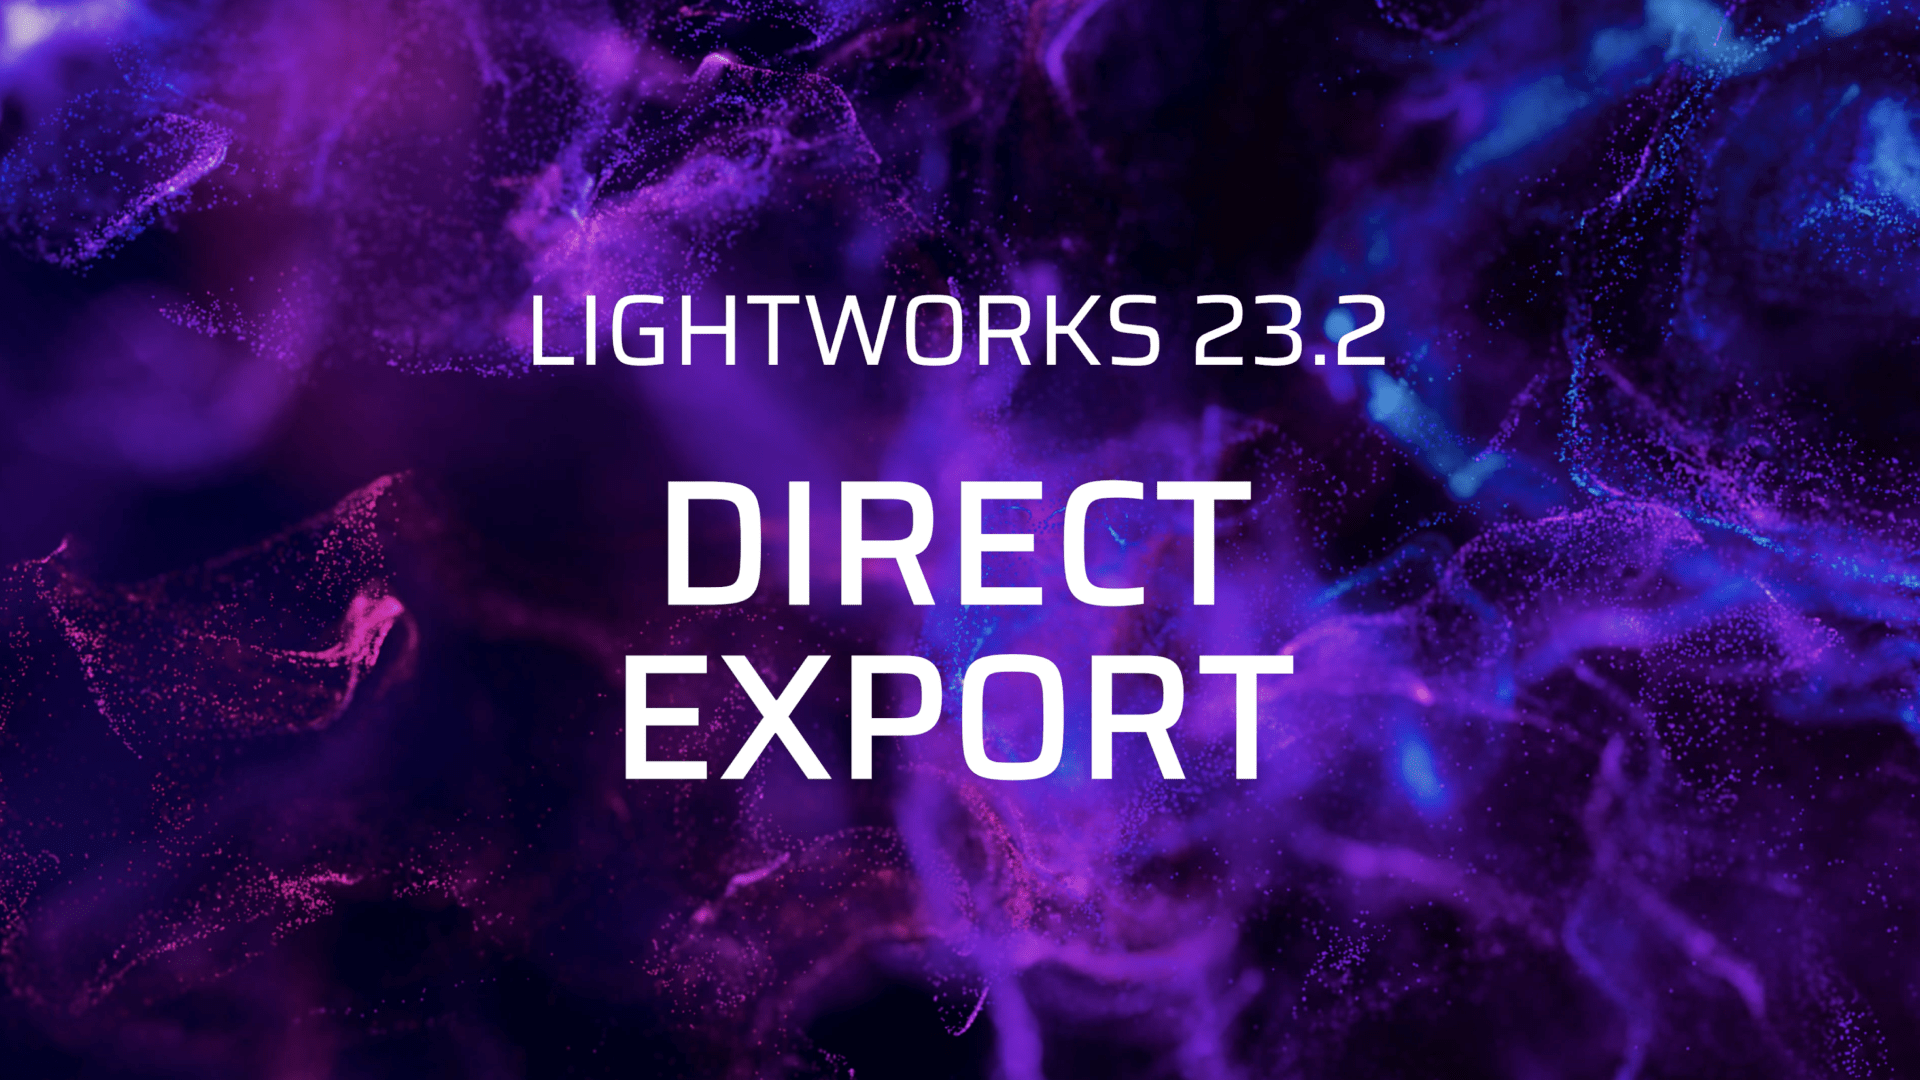 Lightworks Version 23.2: Effortlessly Exporting Videos to YouTube